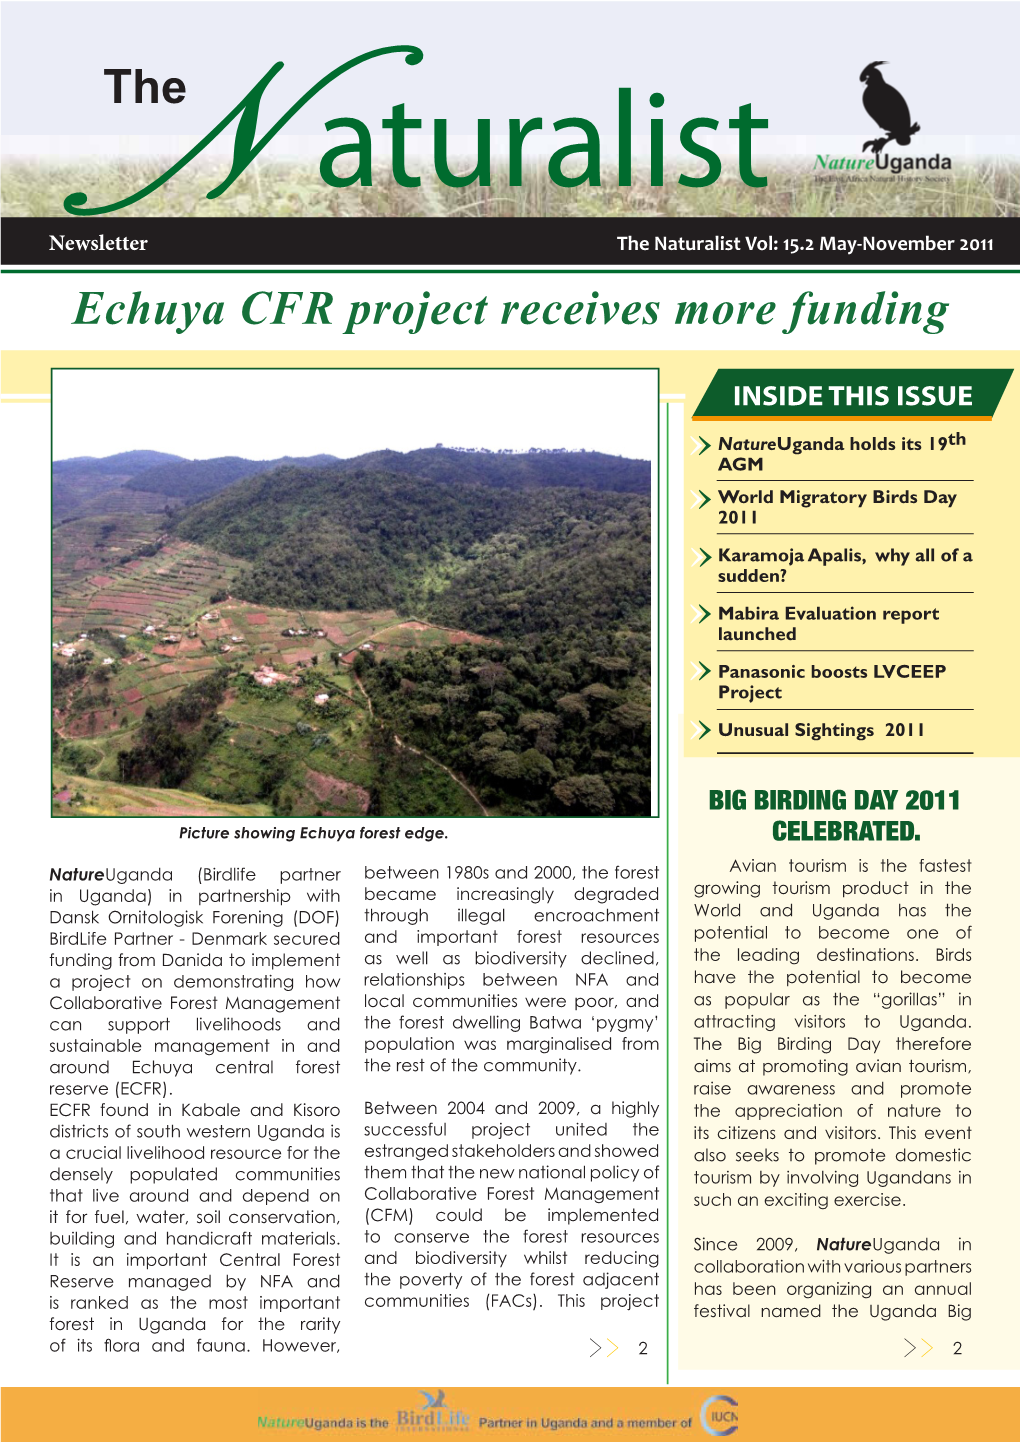 Echuya CFR Project Receives More Funding